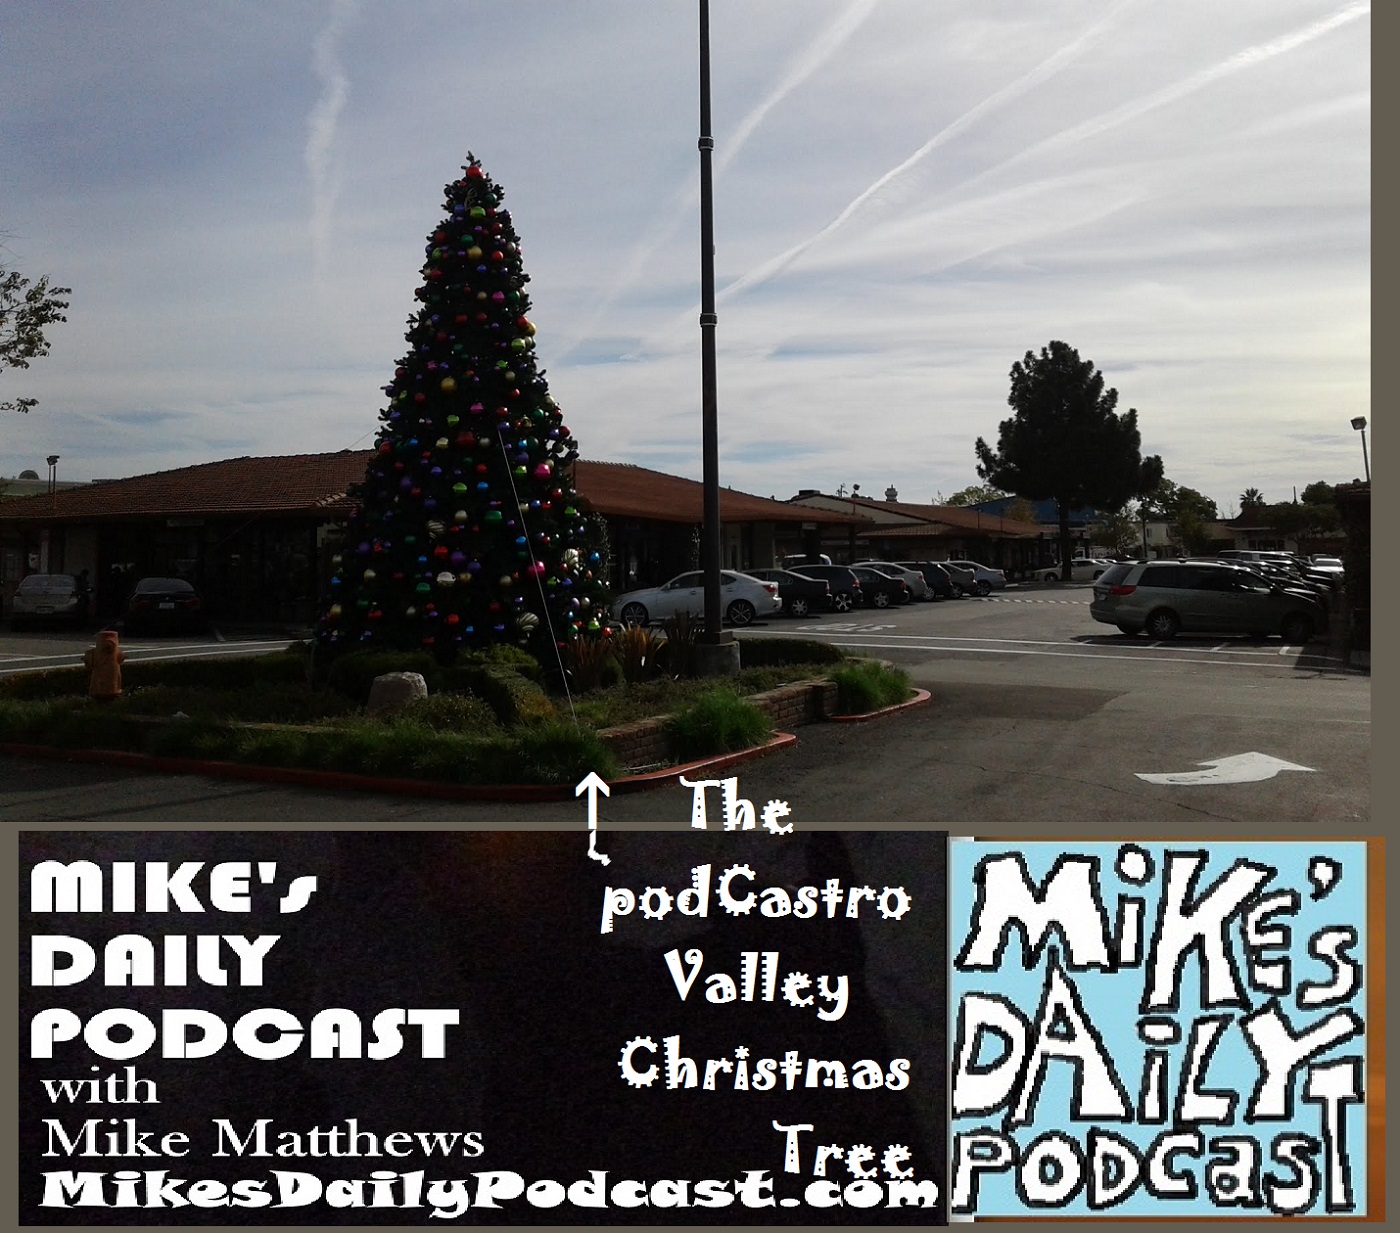 mikes-daily-podcast-1227-christmas-tree-castro-valley